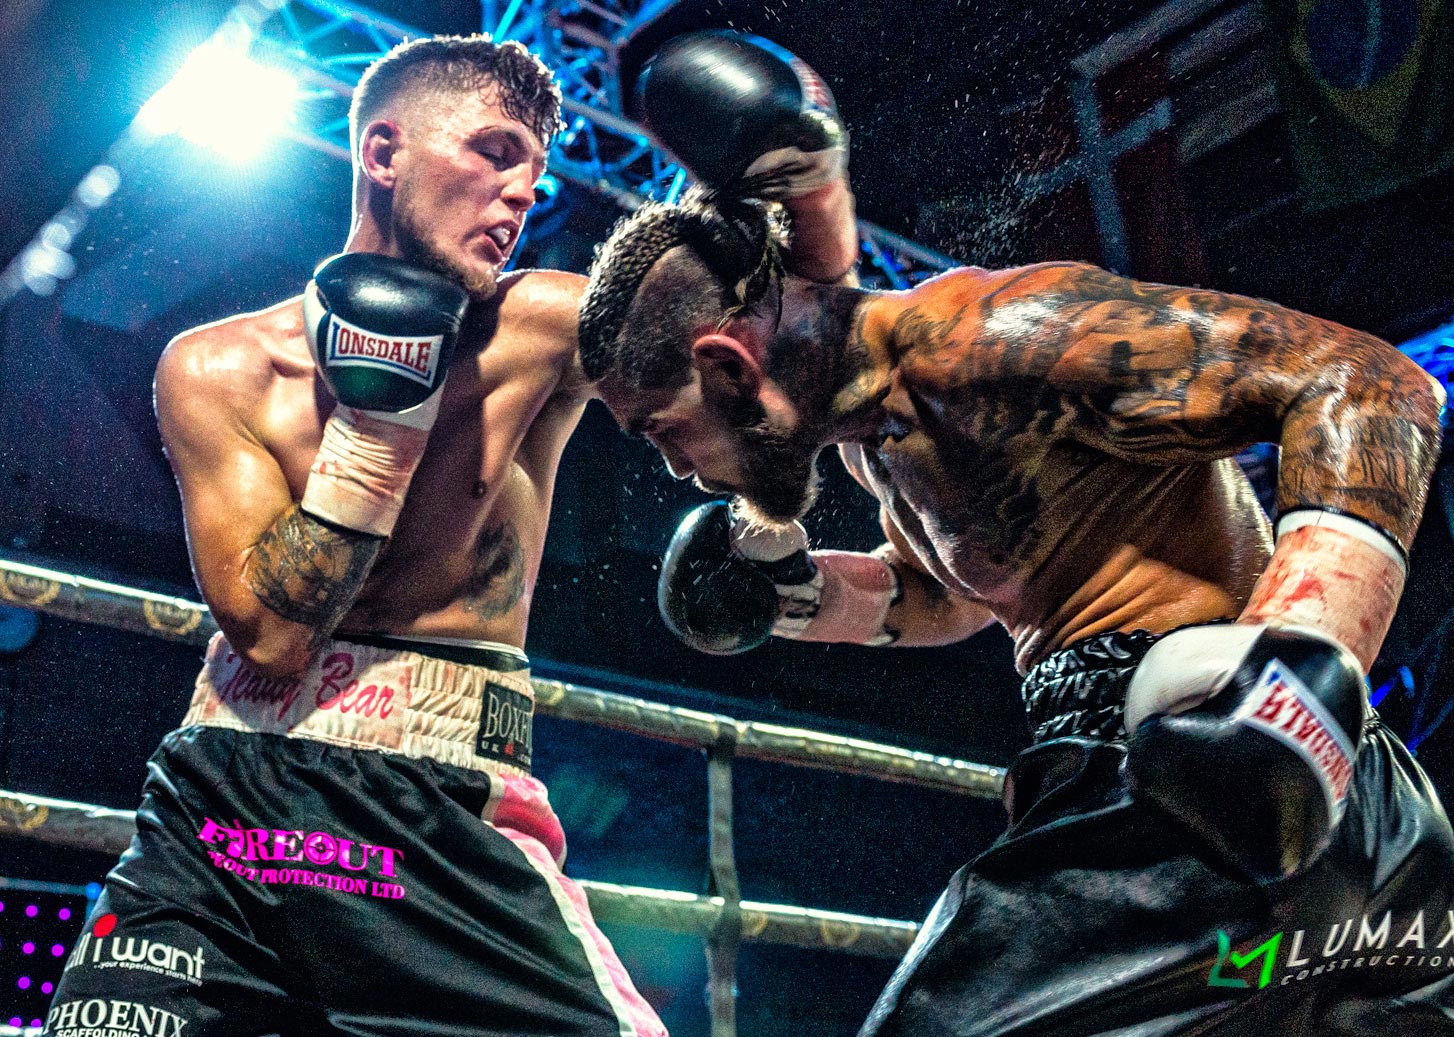 A captivating shot from ringside at a professional boxing match, captured by Wright Content, your premier boxing photographer in London. The image depicts a boxer delivering a jab while another boxer ducks and launches an uppercut, frozen in time as droplets of water fly through the air, adding to the intensity of the moment.